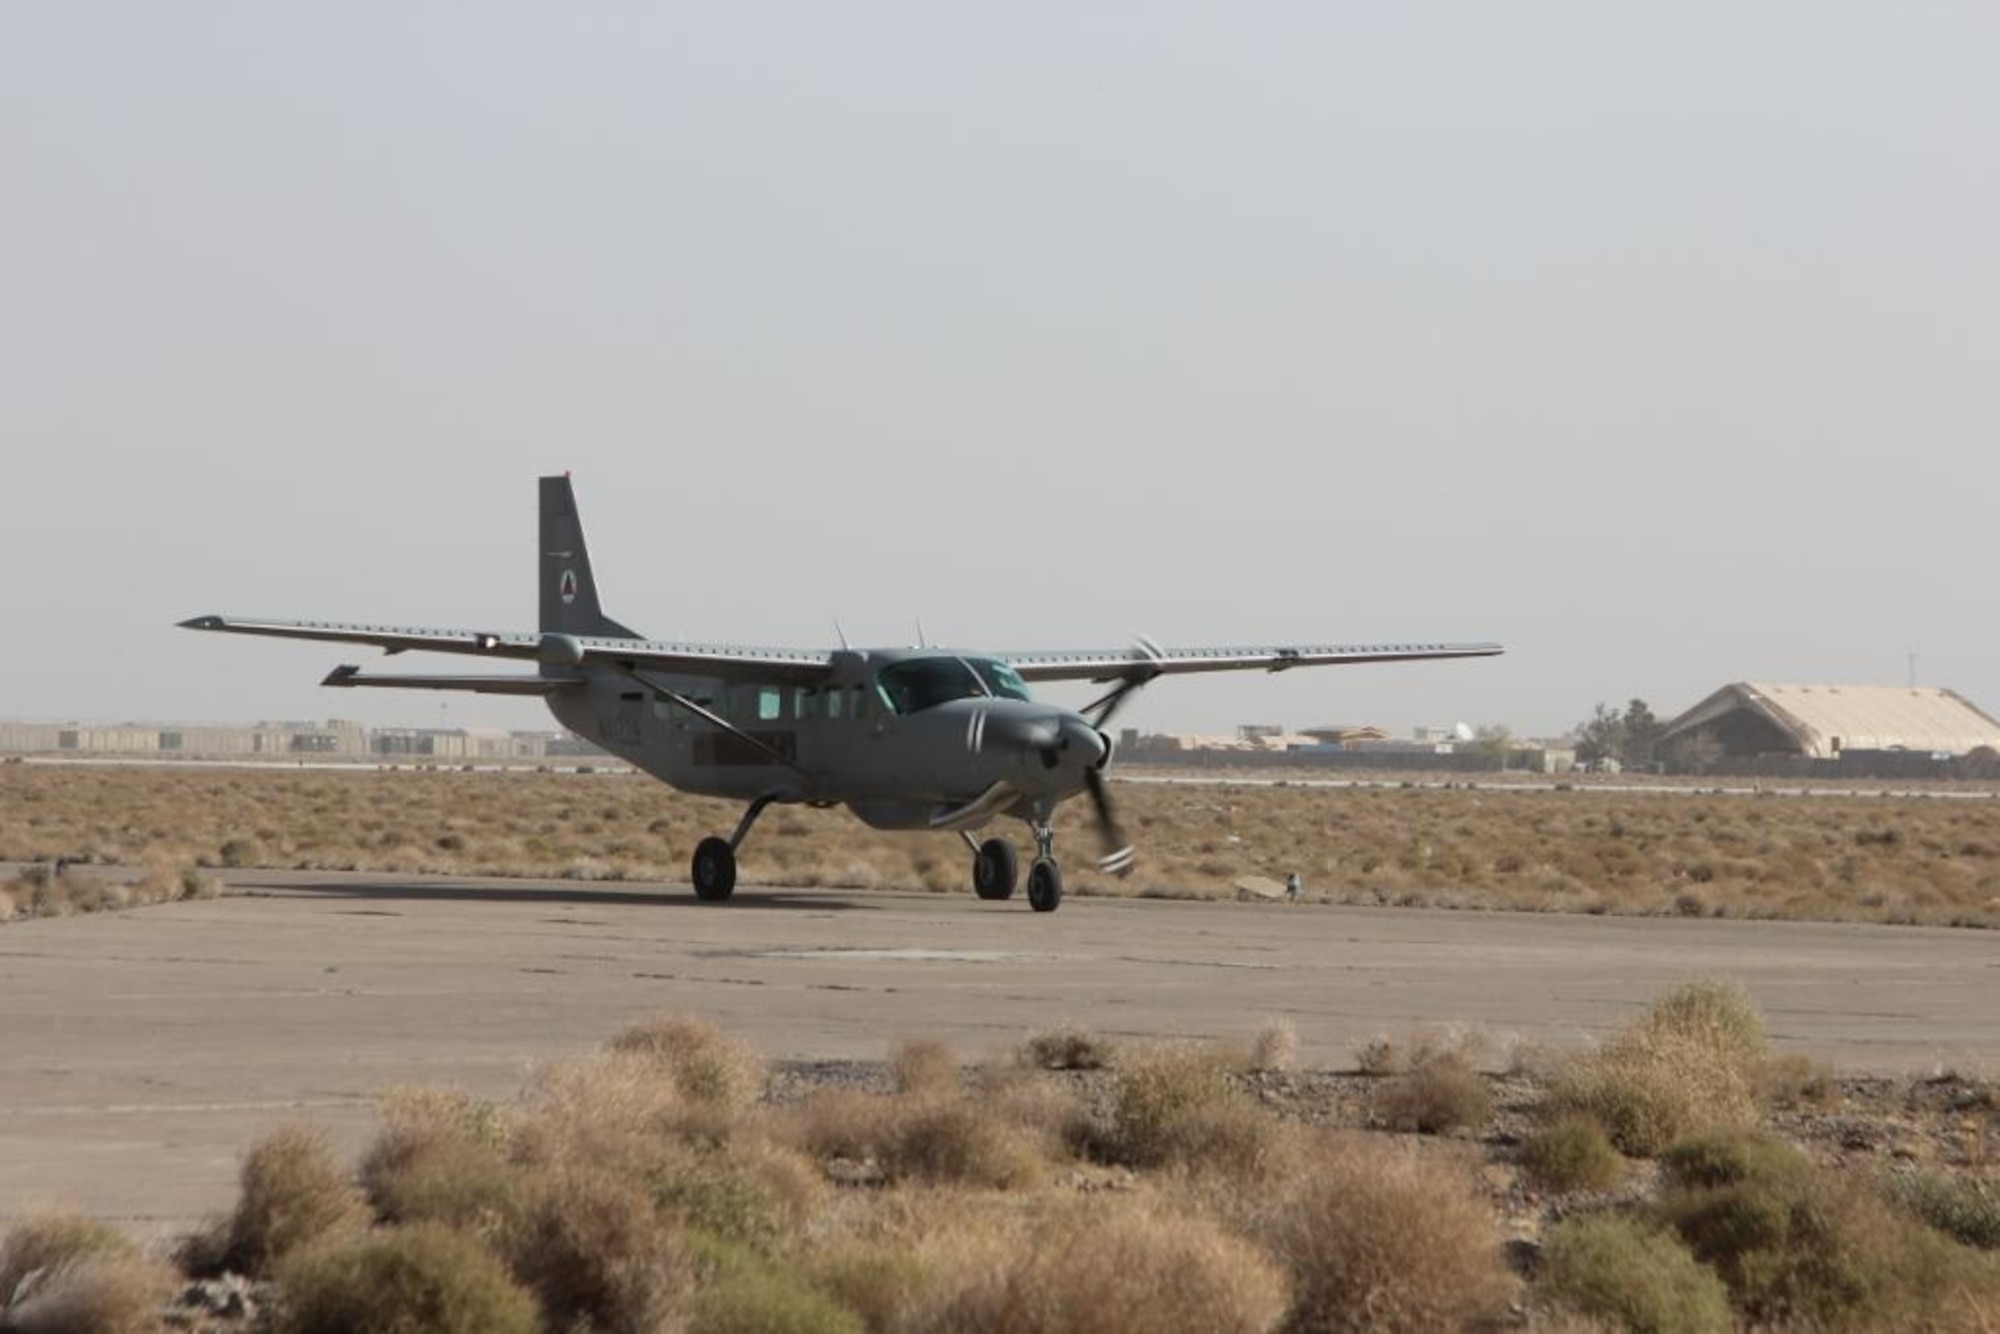 One of three new Cessna 208Bs taxies to its parking pad after landing at Shindand Air Base, October 22. According to Shindand officials, the C-208B’s will be used as the advanced trainers for Afghan undergraduate pilot training, initial qualification and upgrade training as well as operational light airlift. (ISAF photo by Sargento OR-6 Juan Ardura Santa Engracia, Spanish Army, Regional Command West)